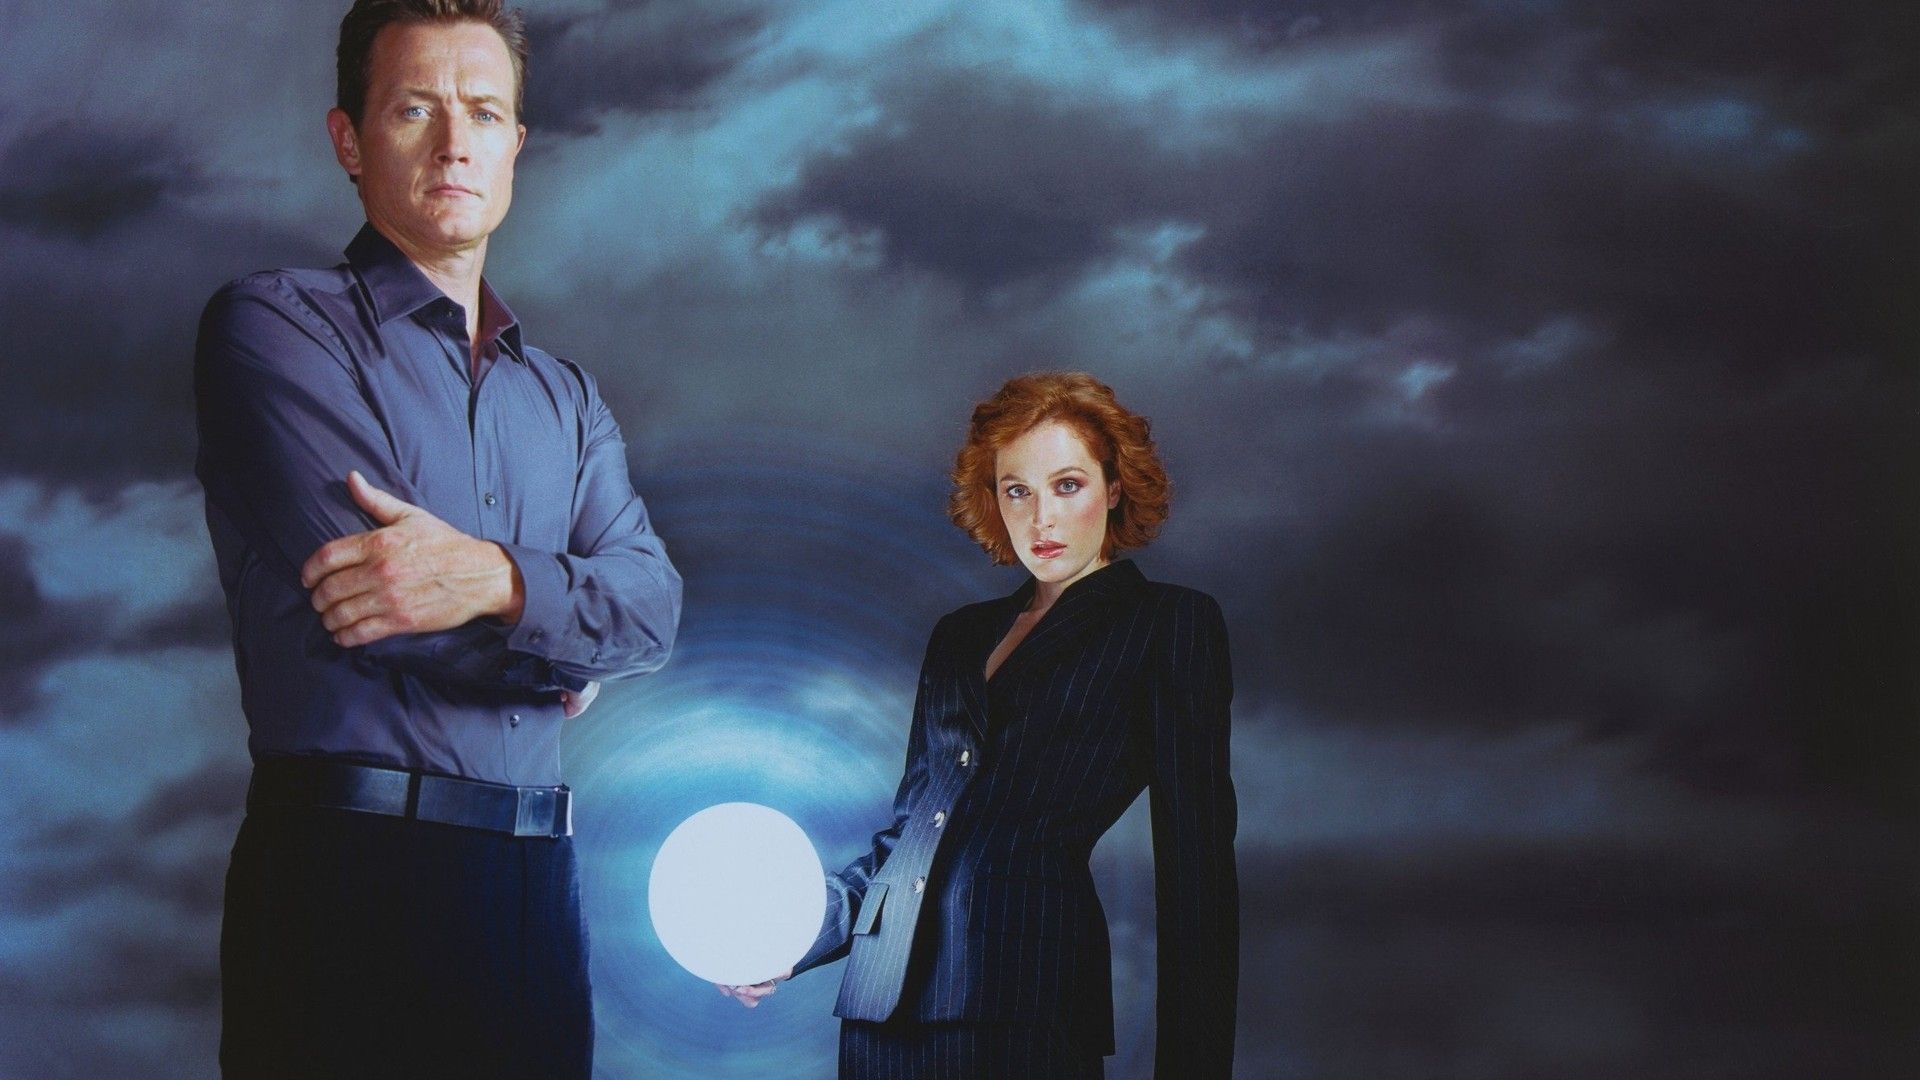 The X Files Wallpaper Image Photo Picture Background